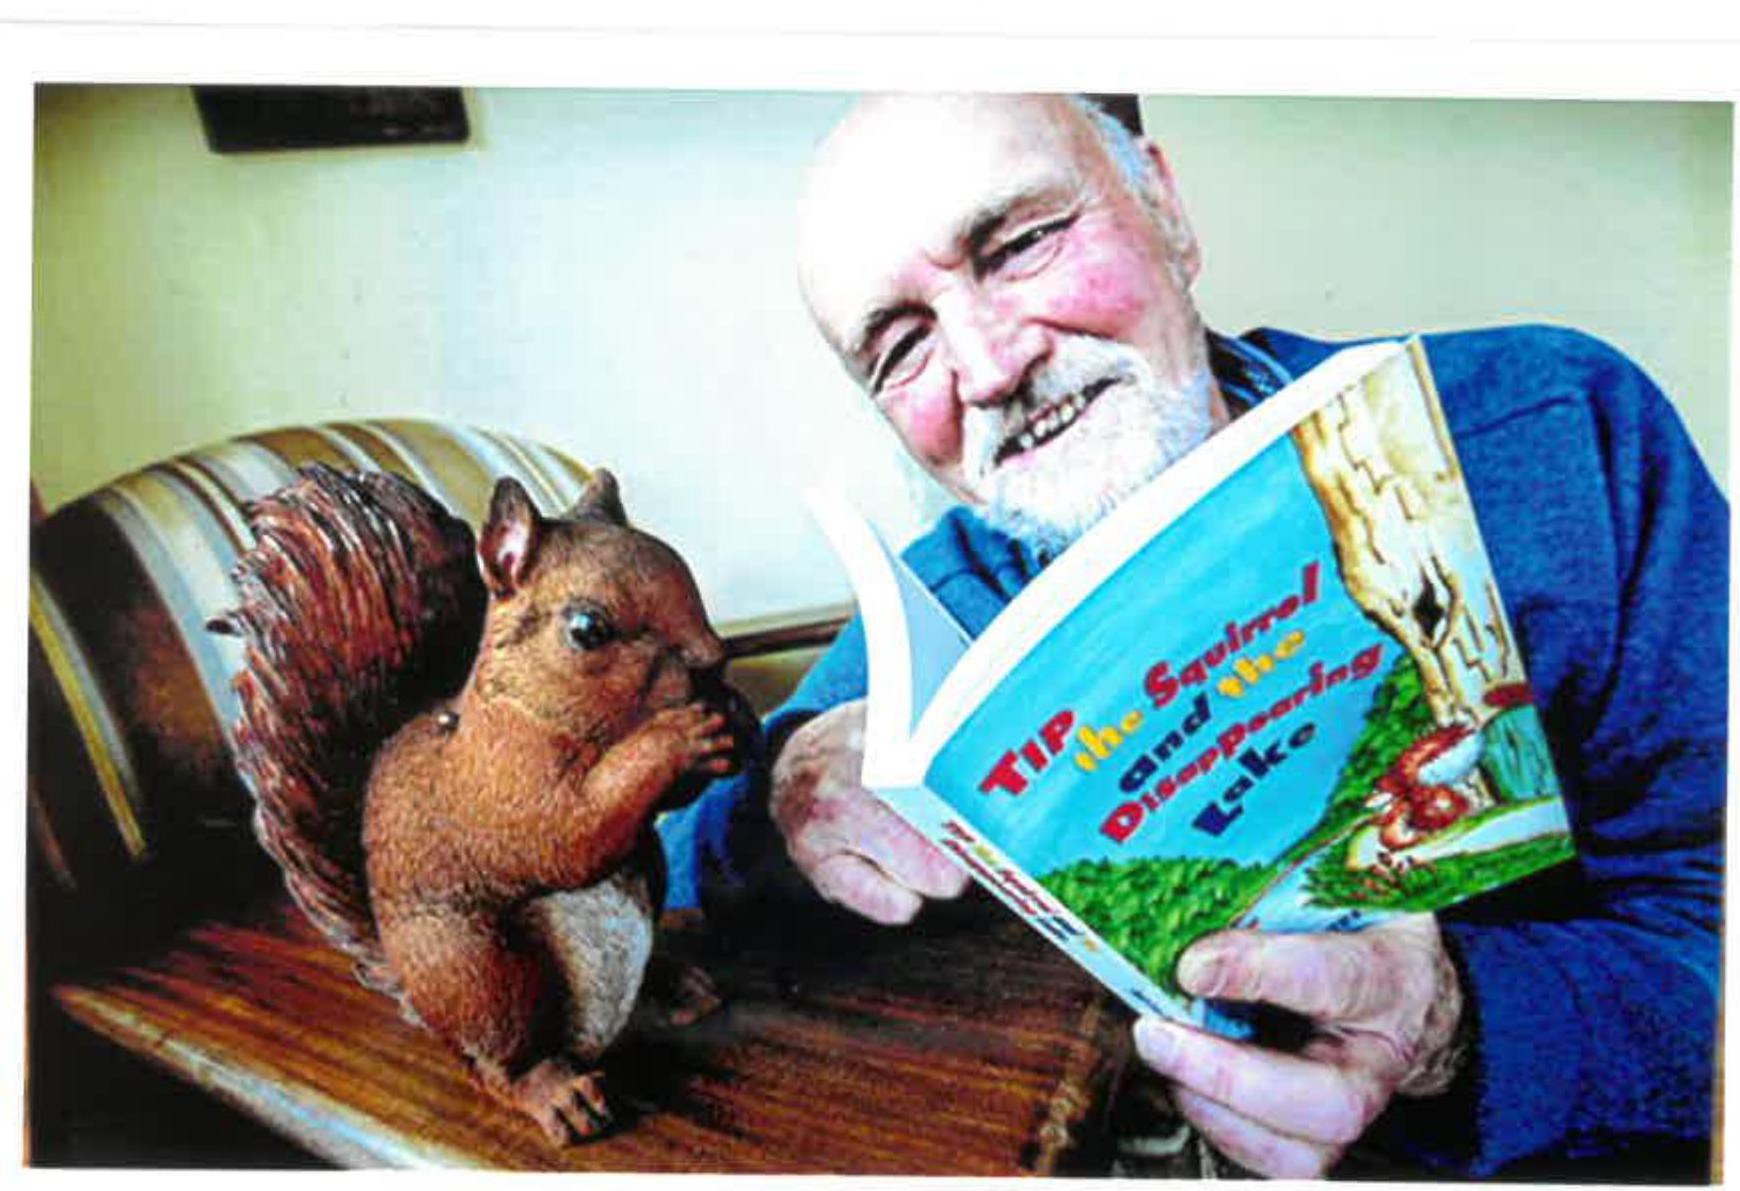 Tip the Squirrel and the Disappearing Lake by Adrian T. Jones Gets Featured in a Newspaper